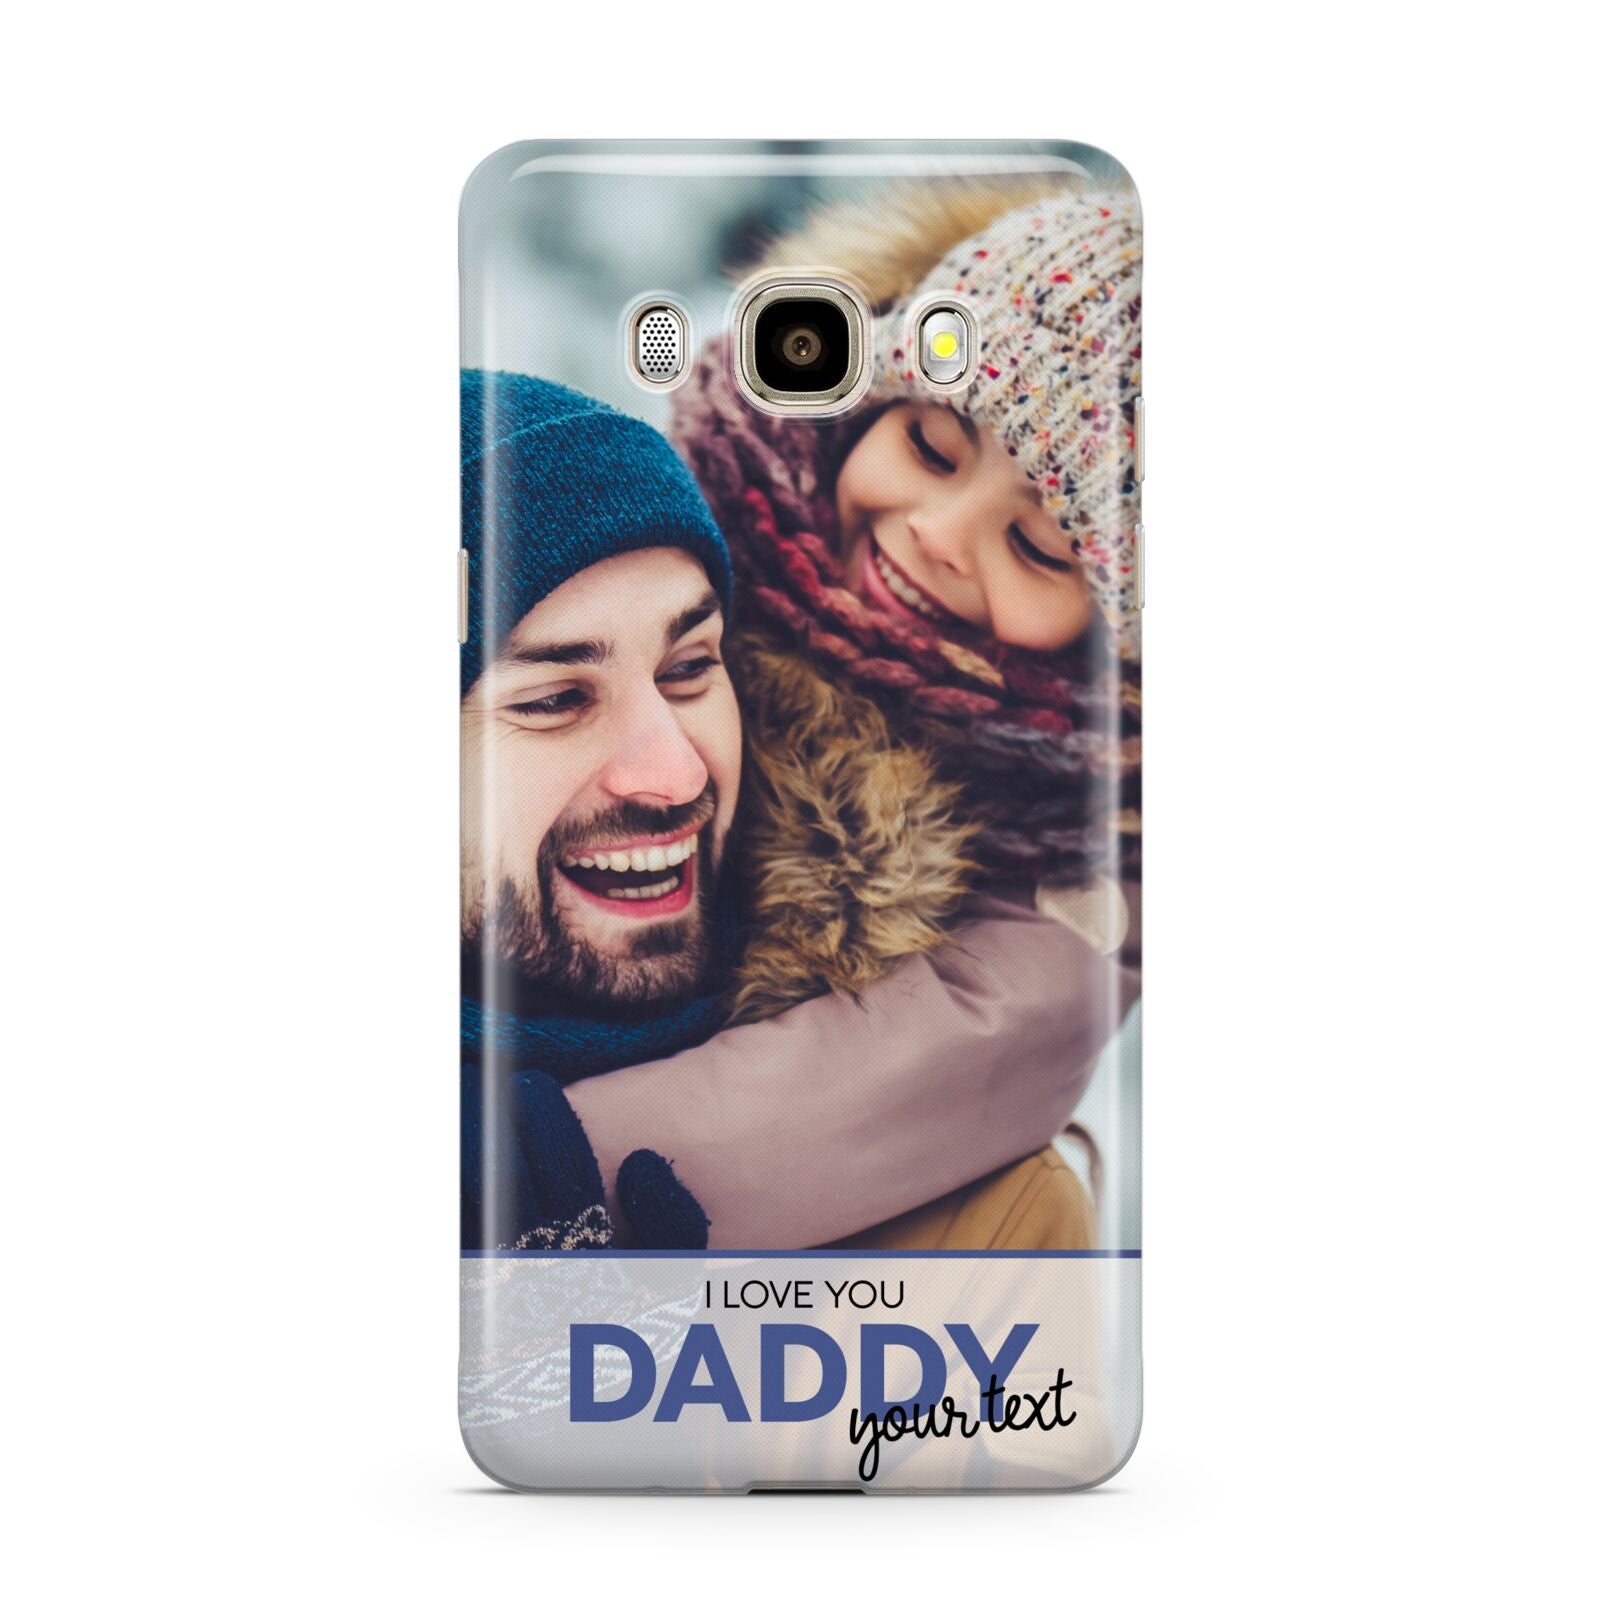 I Love You Daddy Personalised Photo Upload and Name Samsung Galaxy J7 2016 Case on gold phone